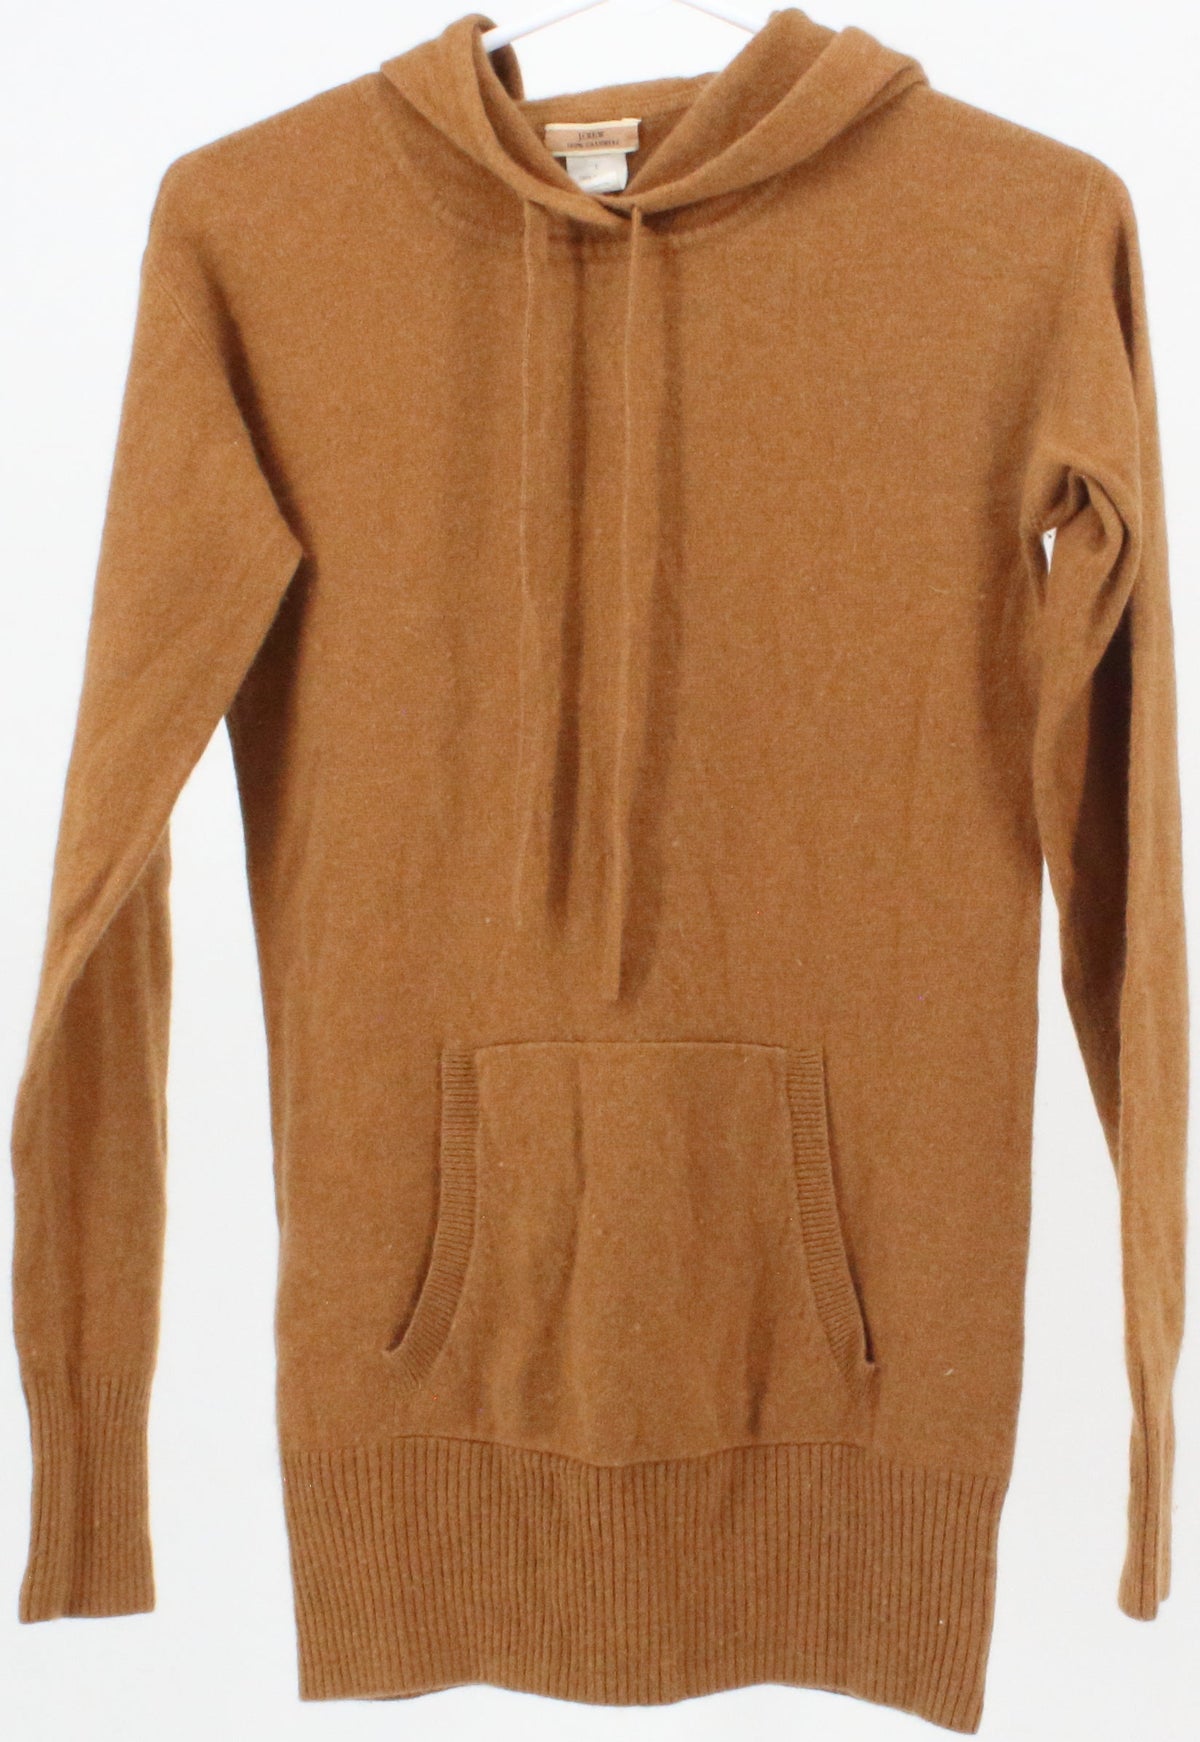 J Crew Camel Hooded Cashmere Sweater